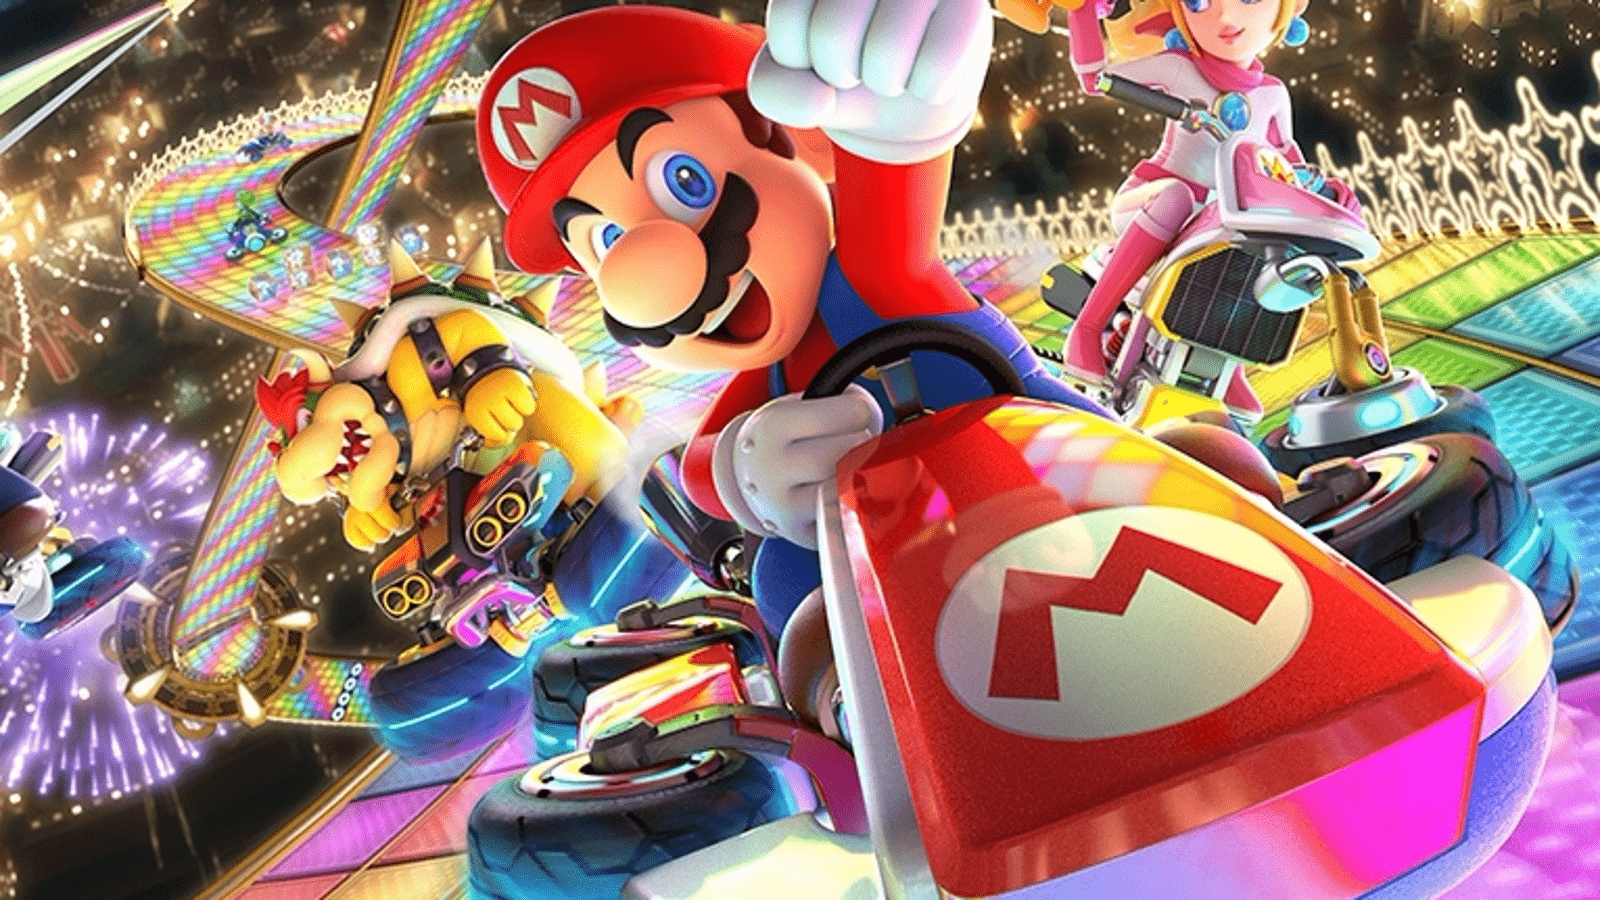 Mario Kart 8 is one of the best-selling games of all time, and for good reason. - Super Mario